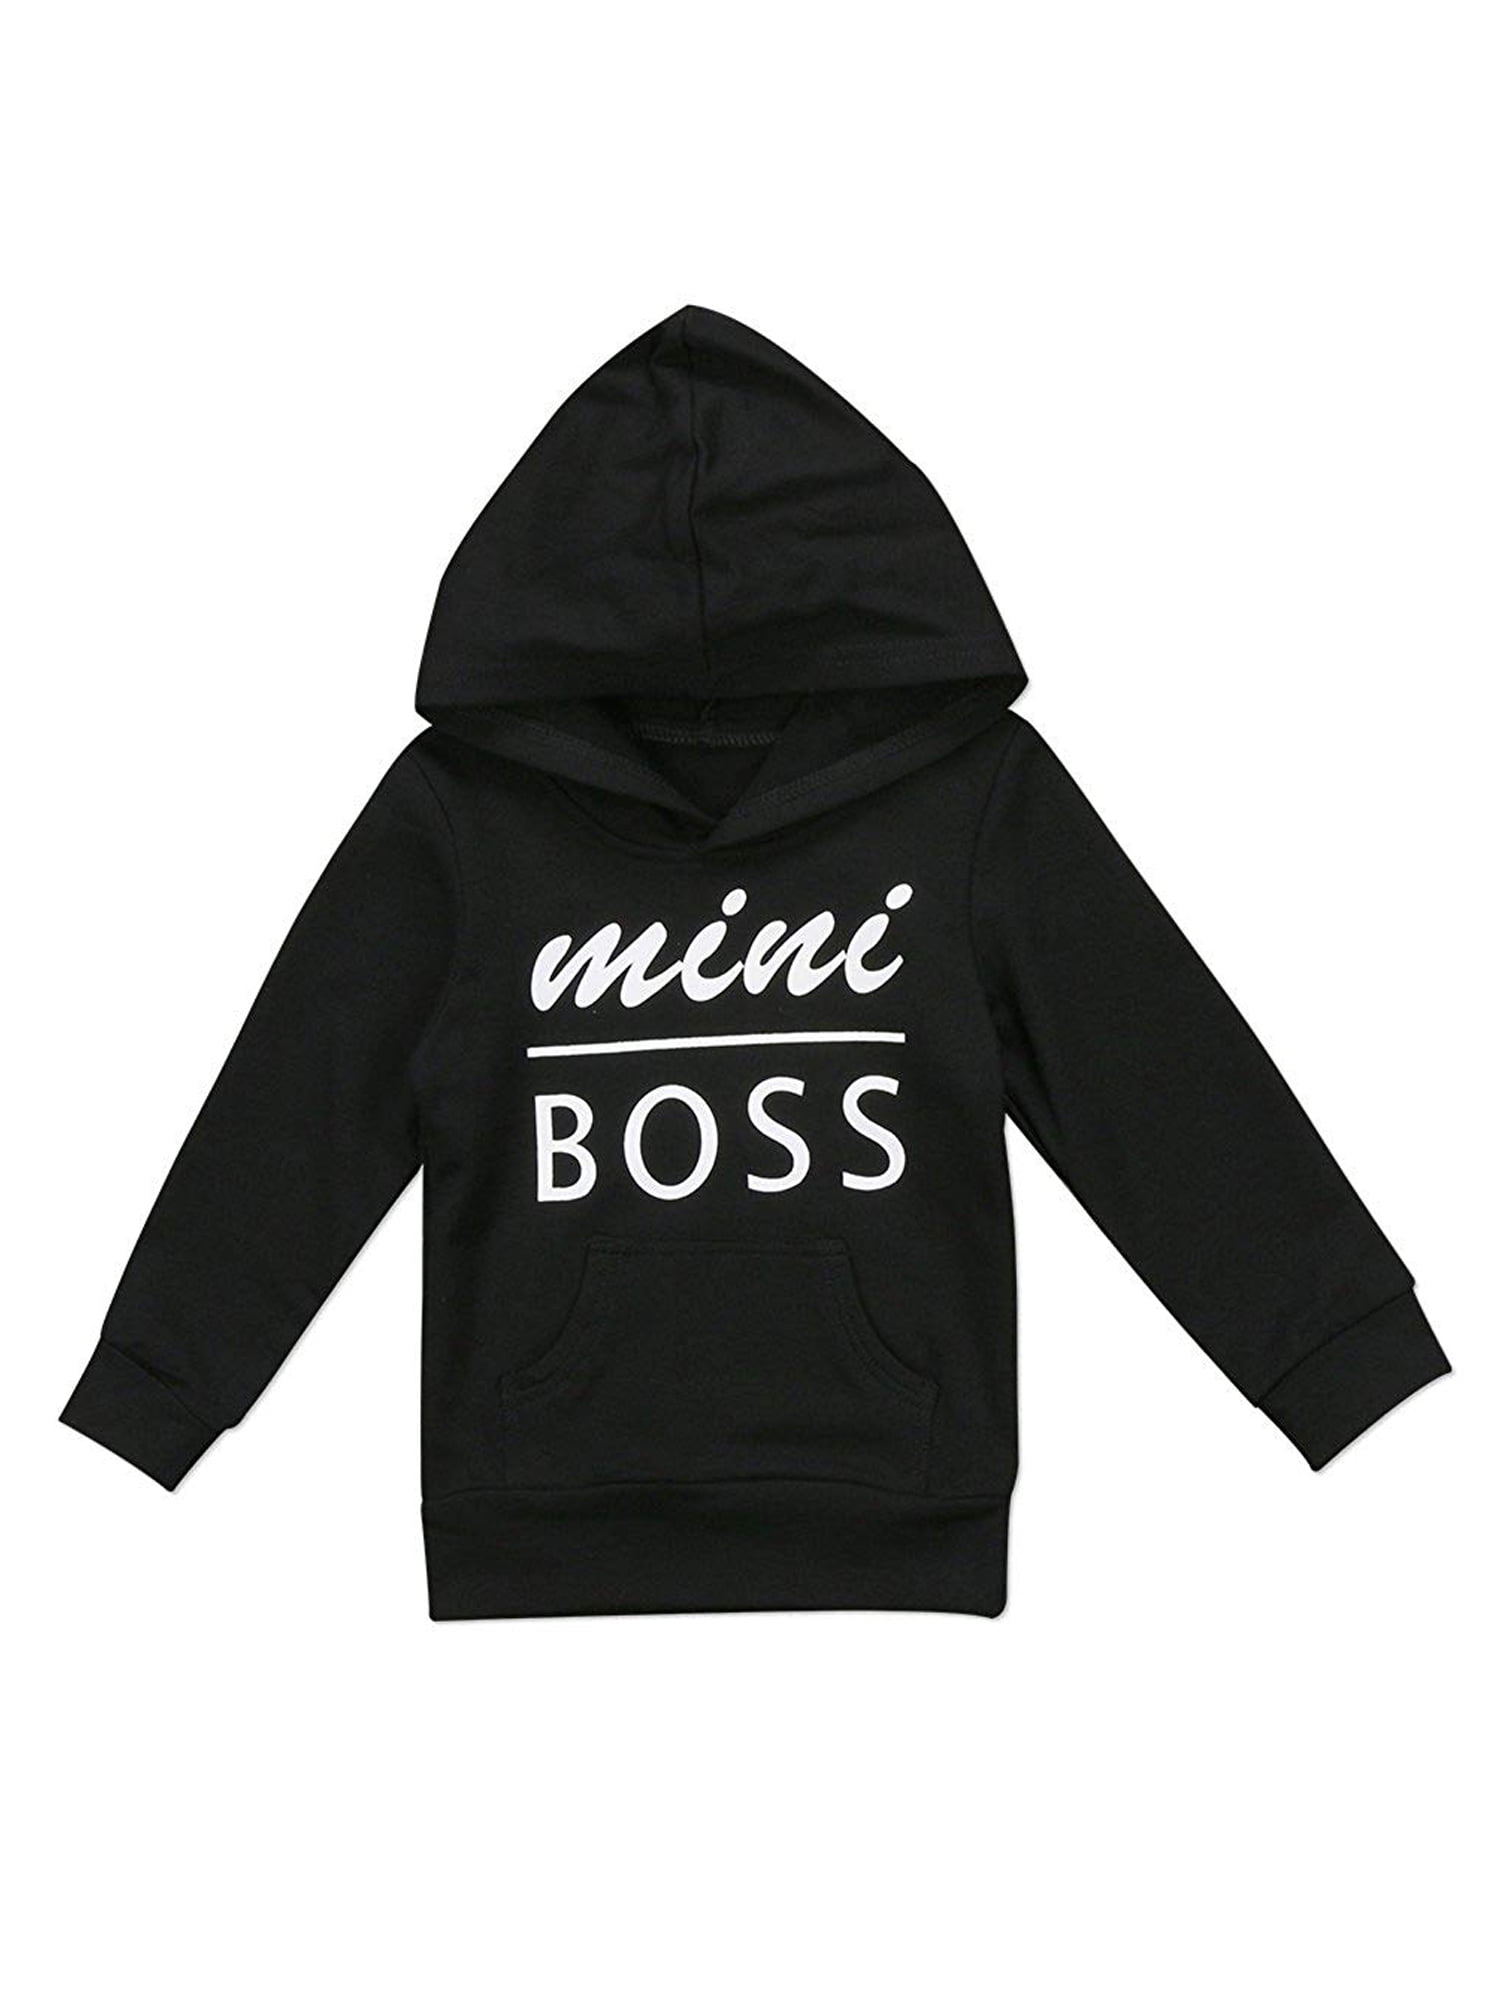 Baby Boy Girls Hoodie Outfits Mini Boss Sweatshirt Casual Tops Pocket Unisex Toddler Outdoor Fall Winter Clothes 1-5T 